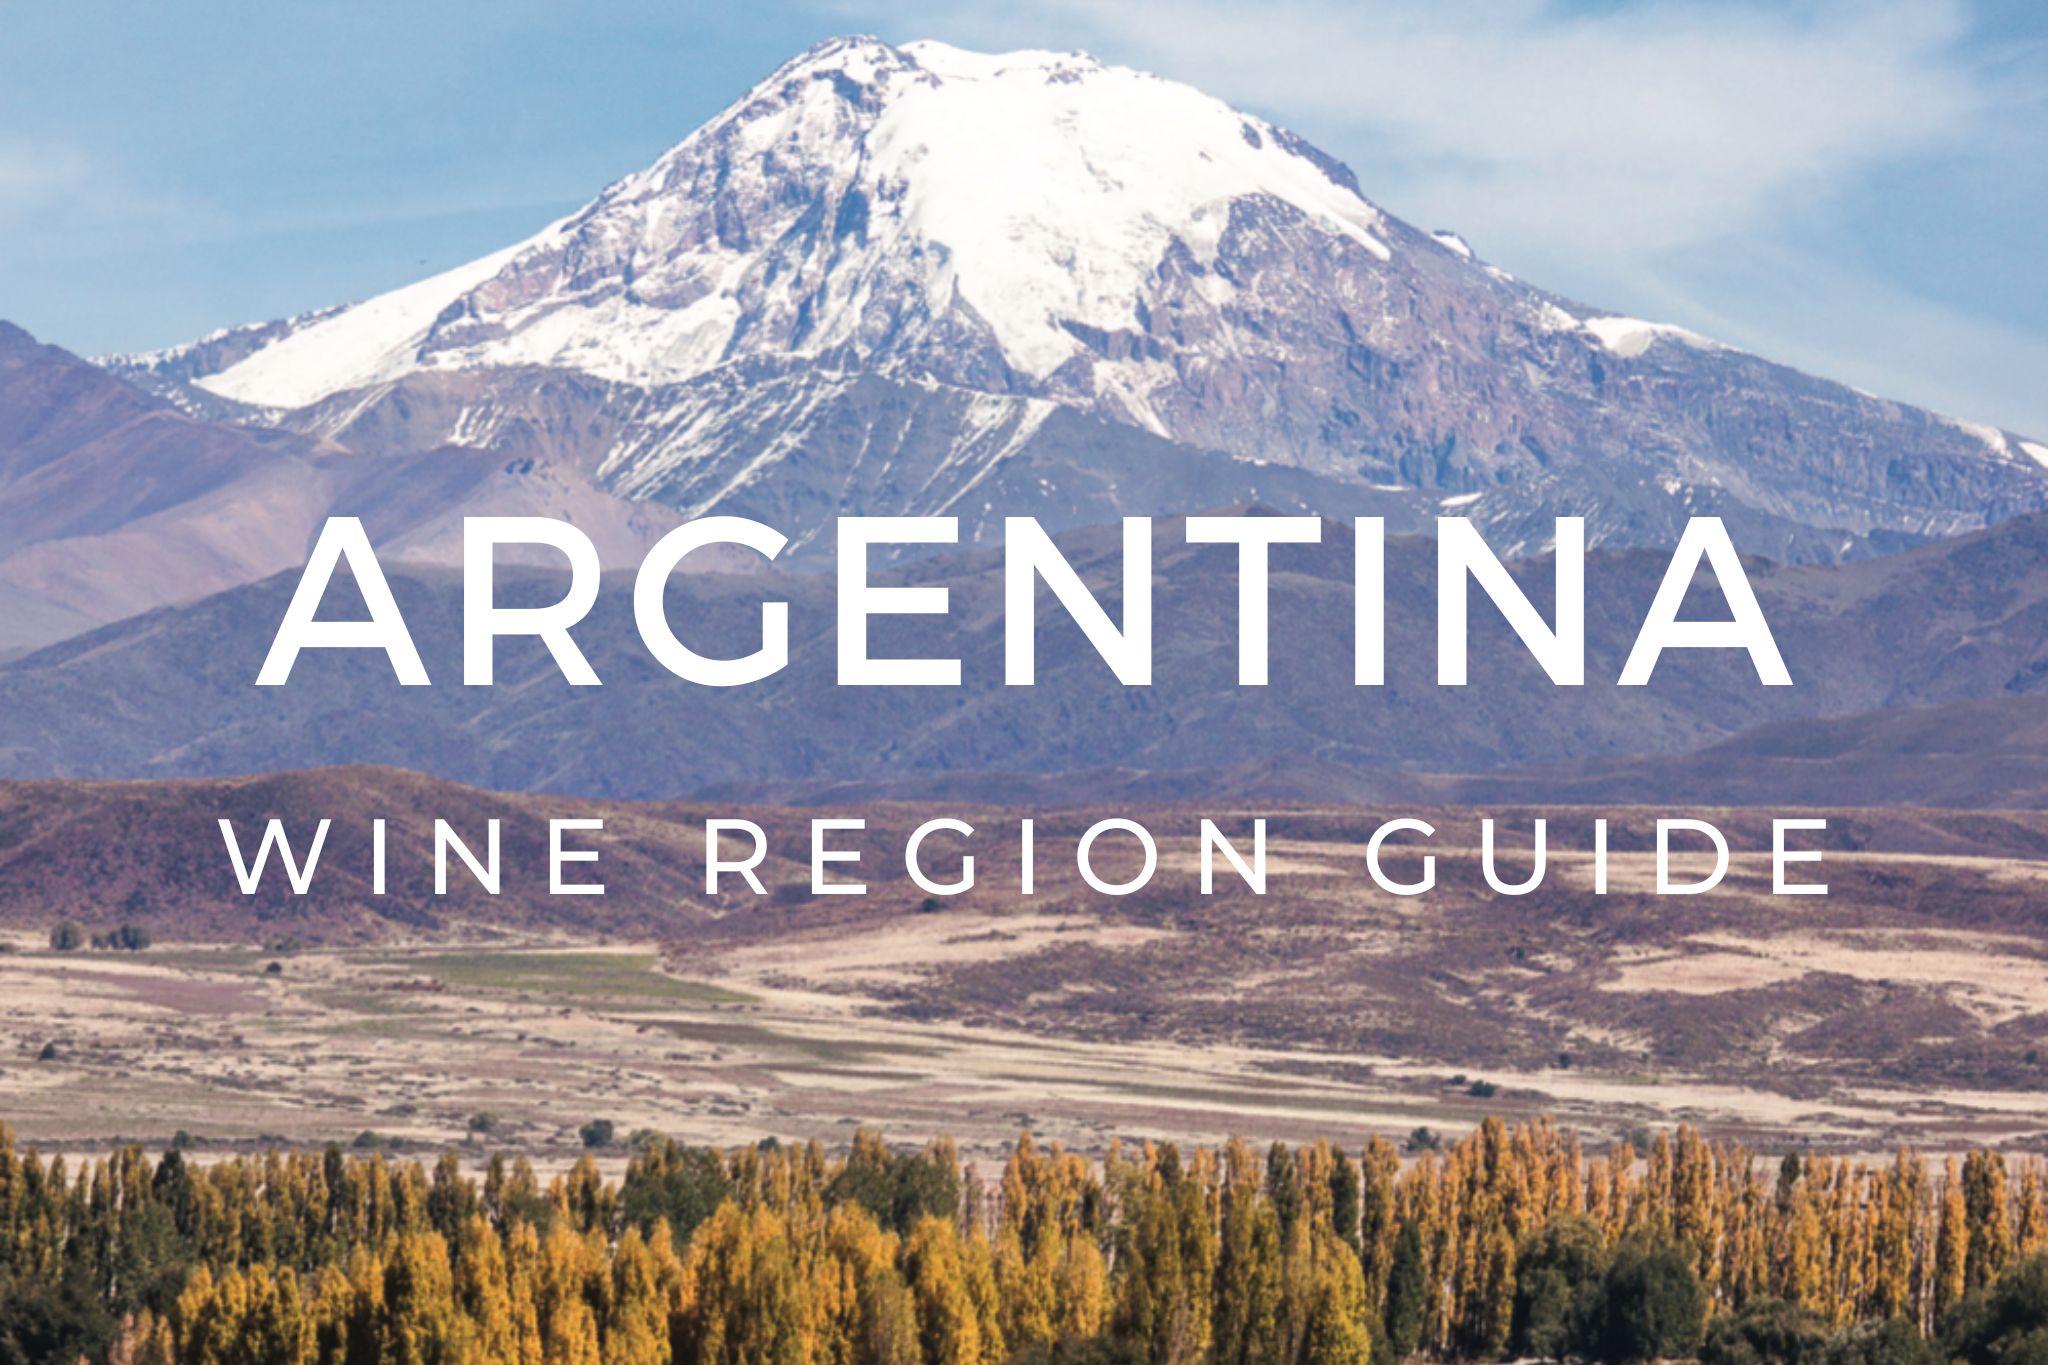 Guide to the wine regions of Argentina: Salta, Cafayate, Caclhaqui valleys, Maipu, Lujan de Cuyo, Uco Valley, Mendoza, Patagonia, Buenos Aires. The ultimate wine guide to Argentina